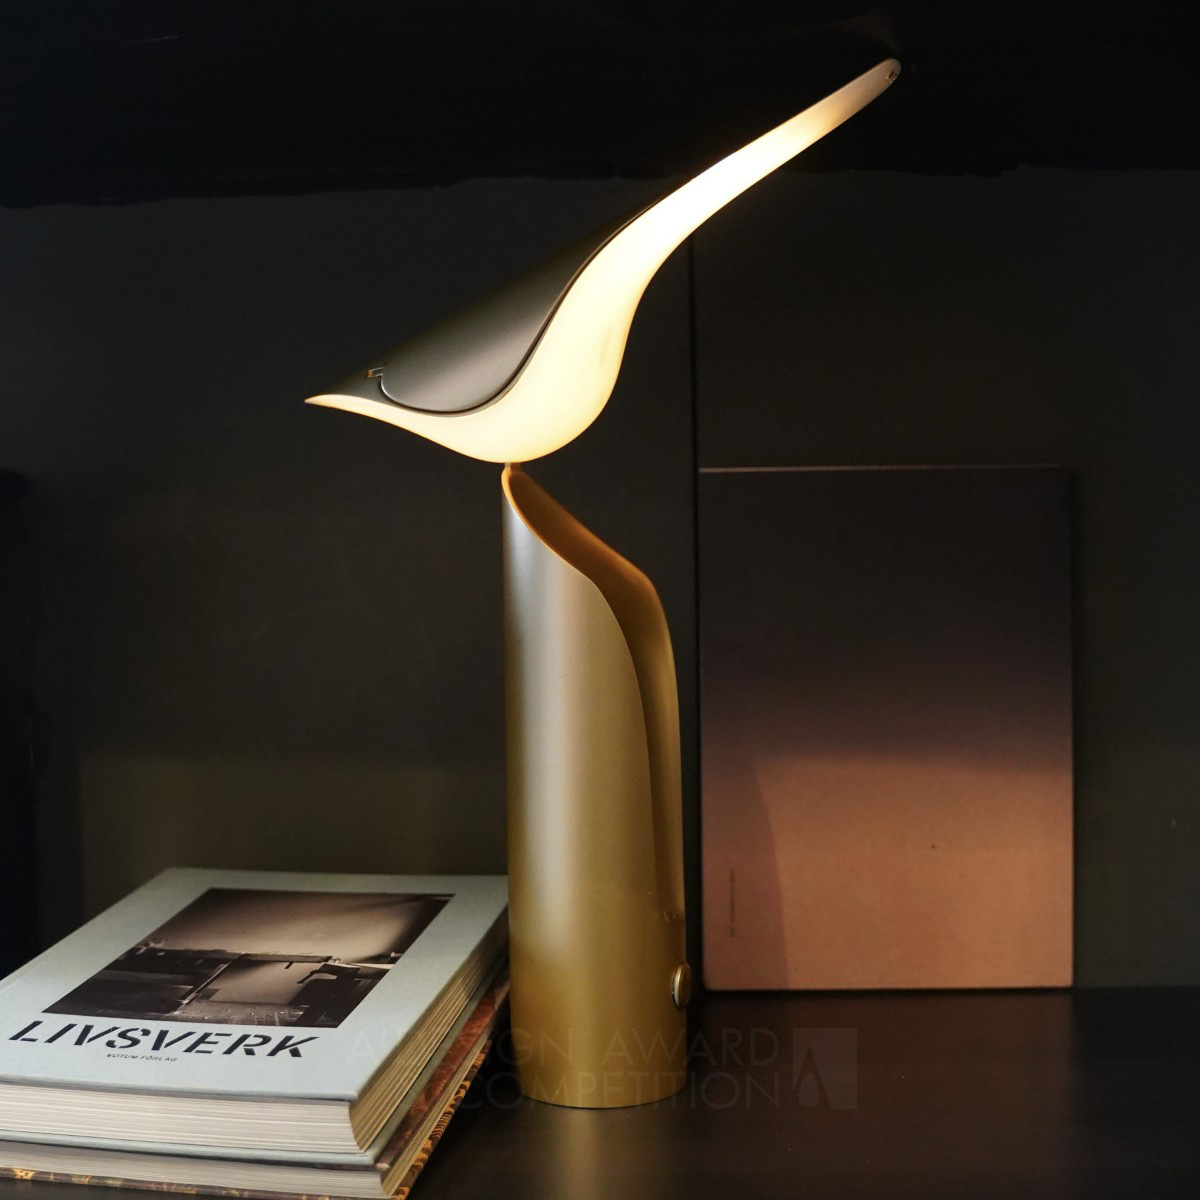 Sha Yang wins Silver at the prestigious A' Lighting Products and Fixtures Design Award with Magpie Table Lamp.